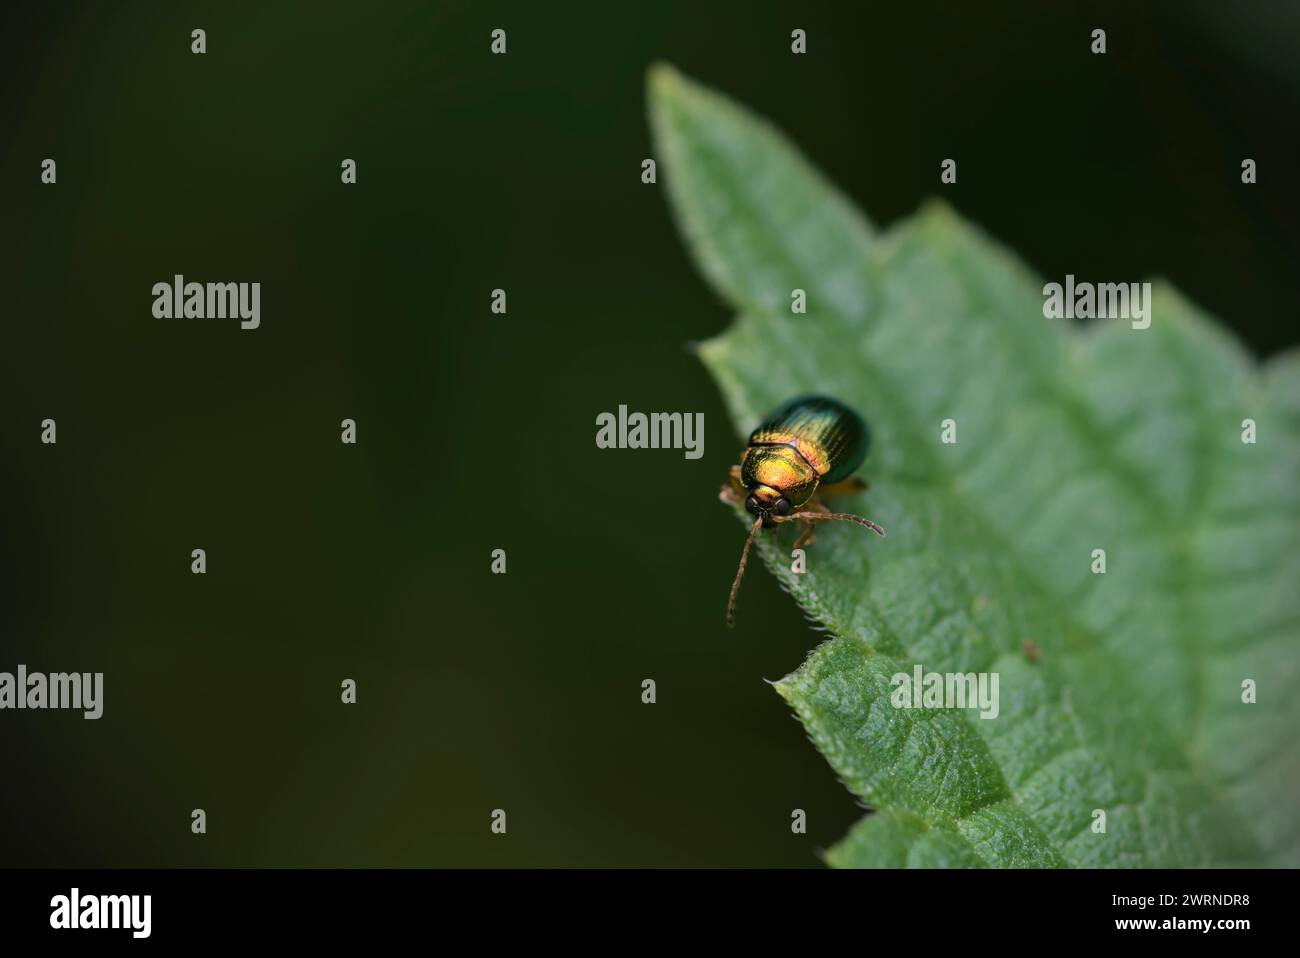 Single leaf beetle (Crepidodera sp.) on a leaf, Macro photography, insects, beetles, closeup, biodiversity Stock Photo